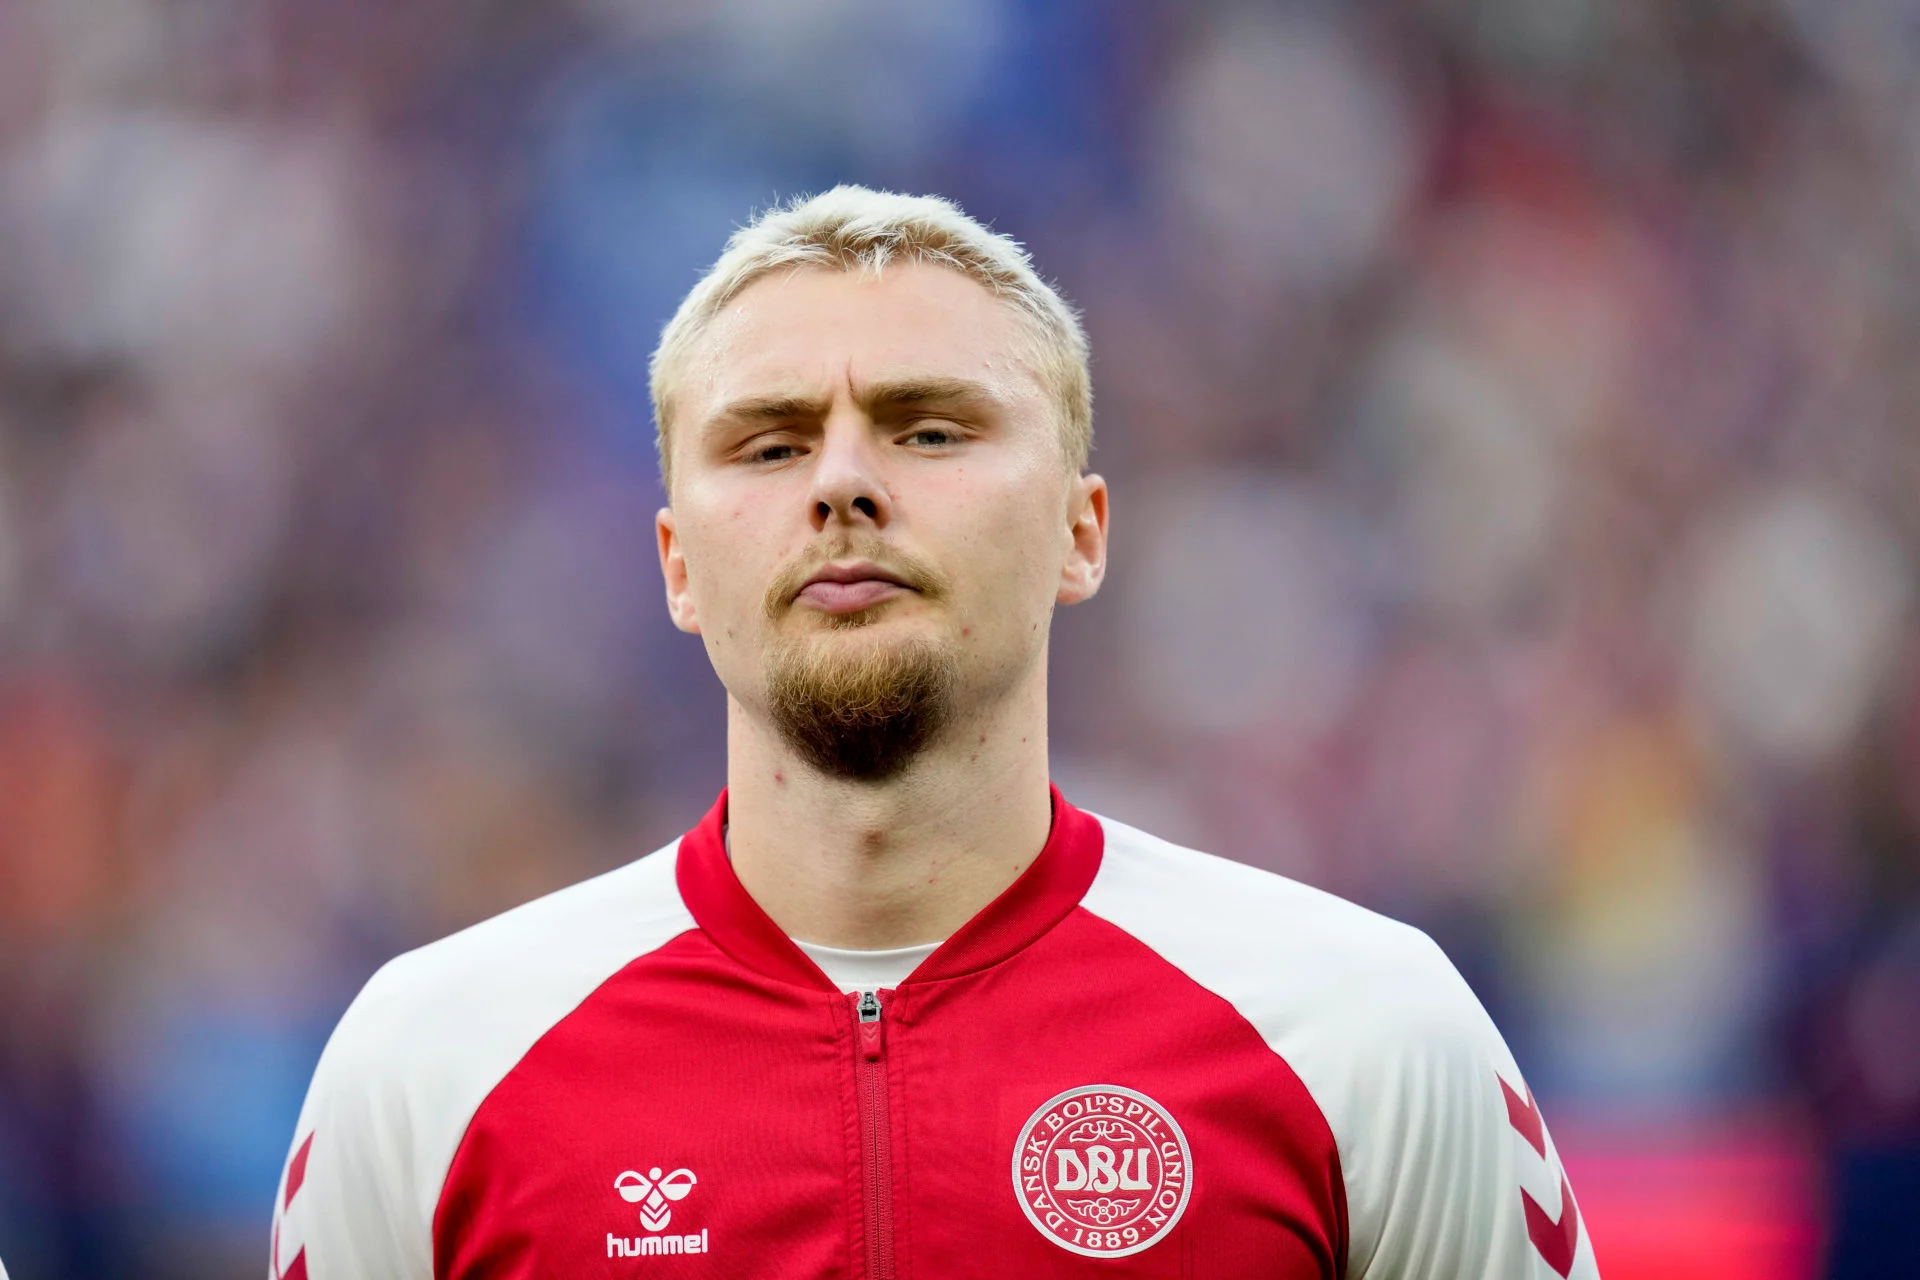 Milan are monitoring the progress of Galatasaray's Nelsson, as they prepare to bolster their squad in a window marked by several key departures.